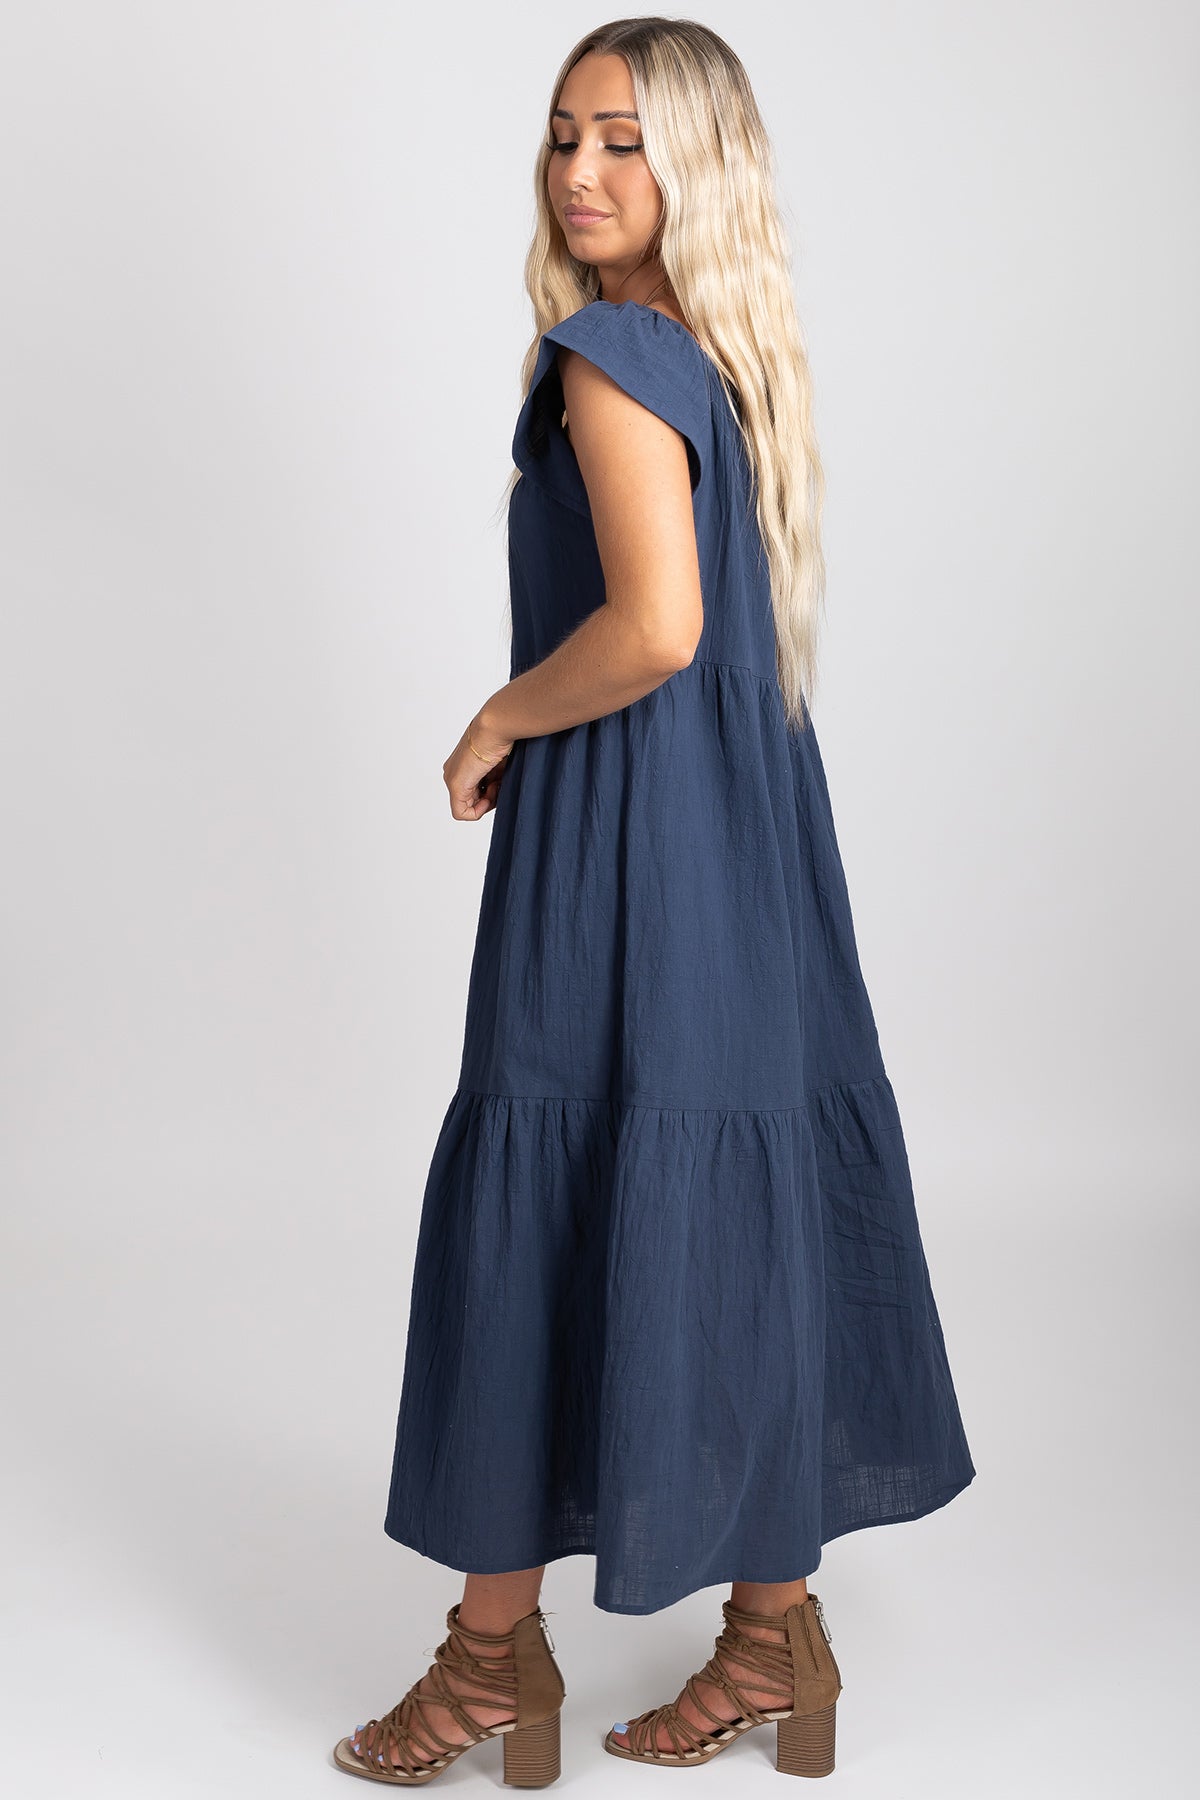 Tiered Midi Dress in Navy Blue for Women